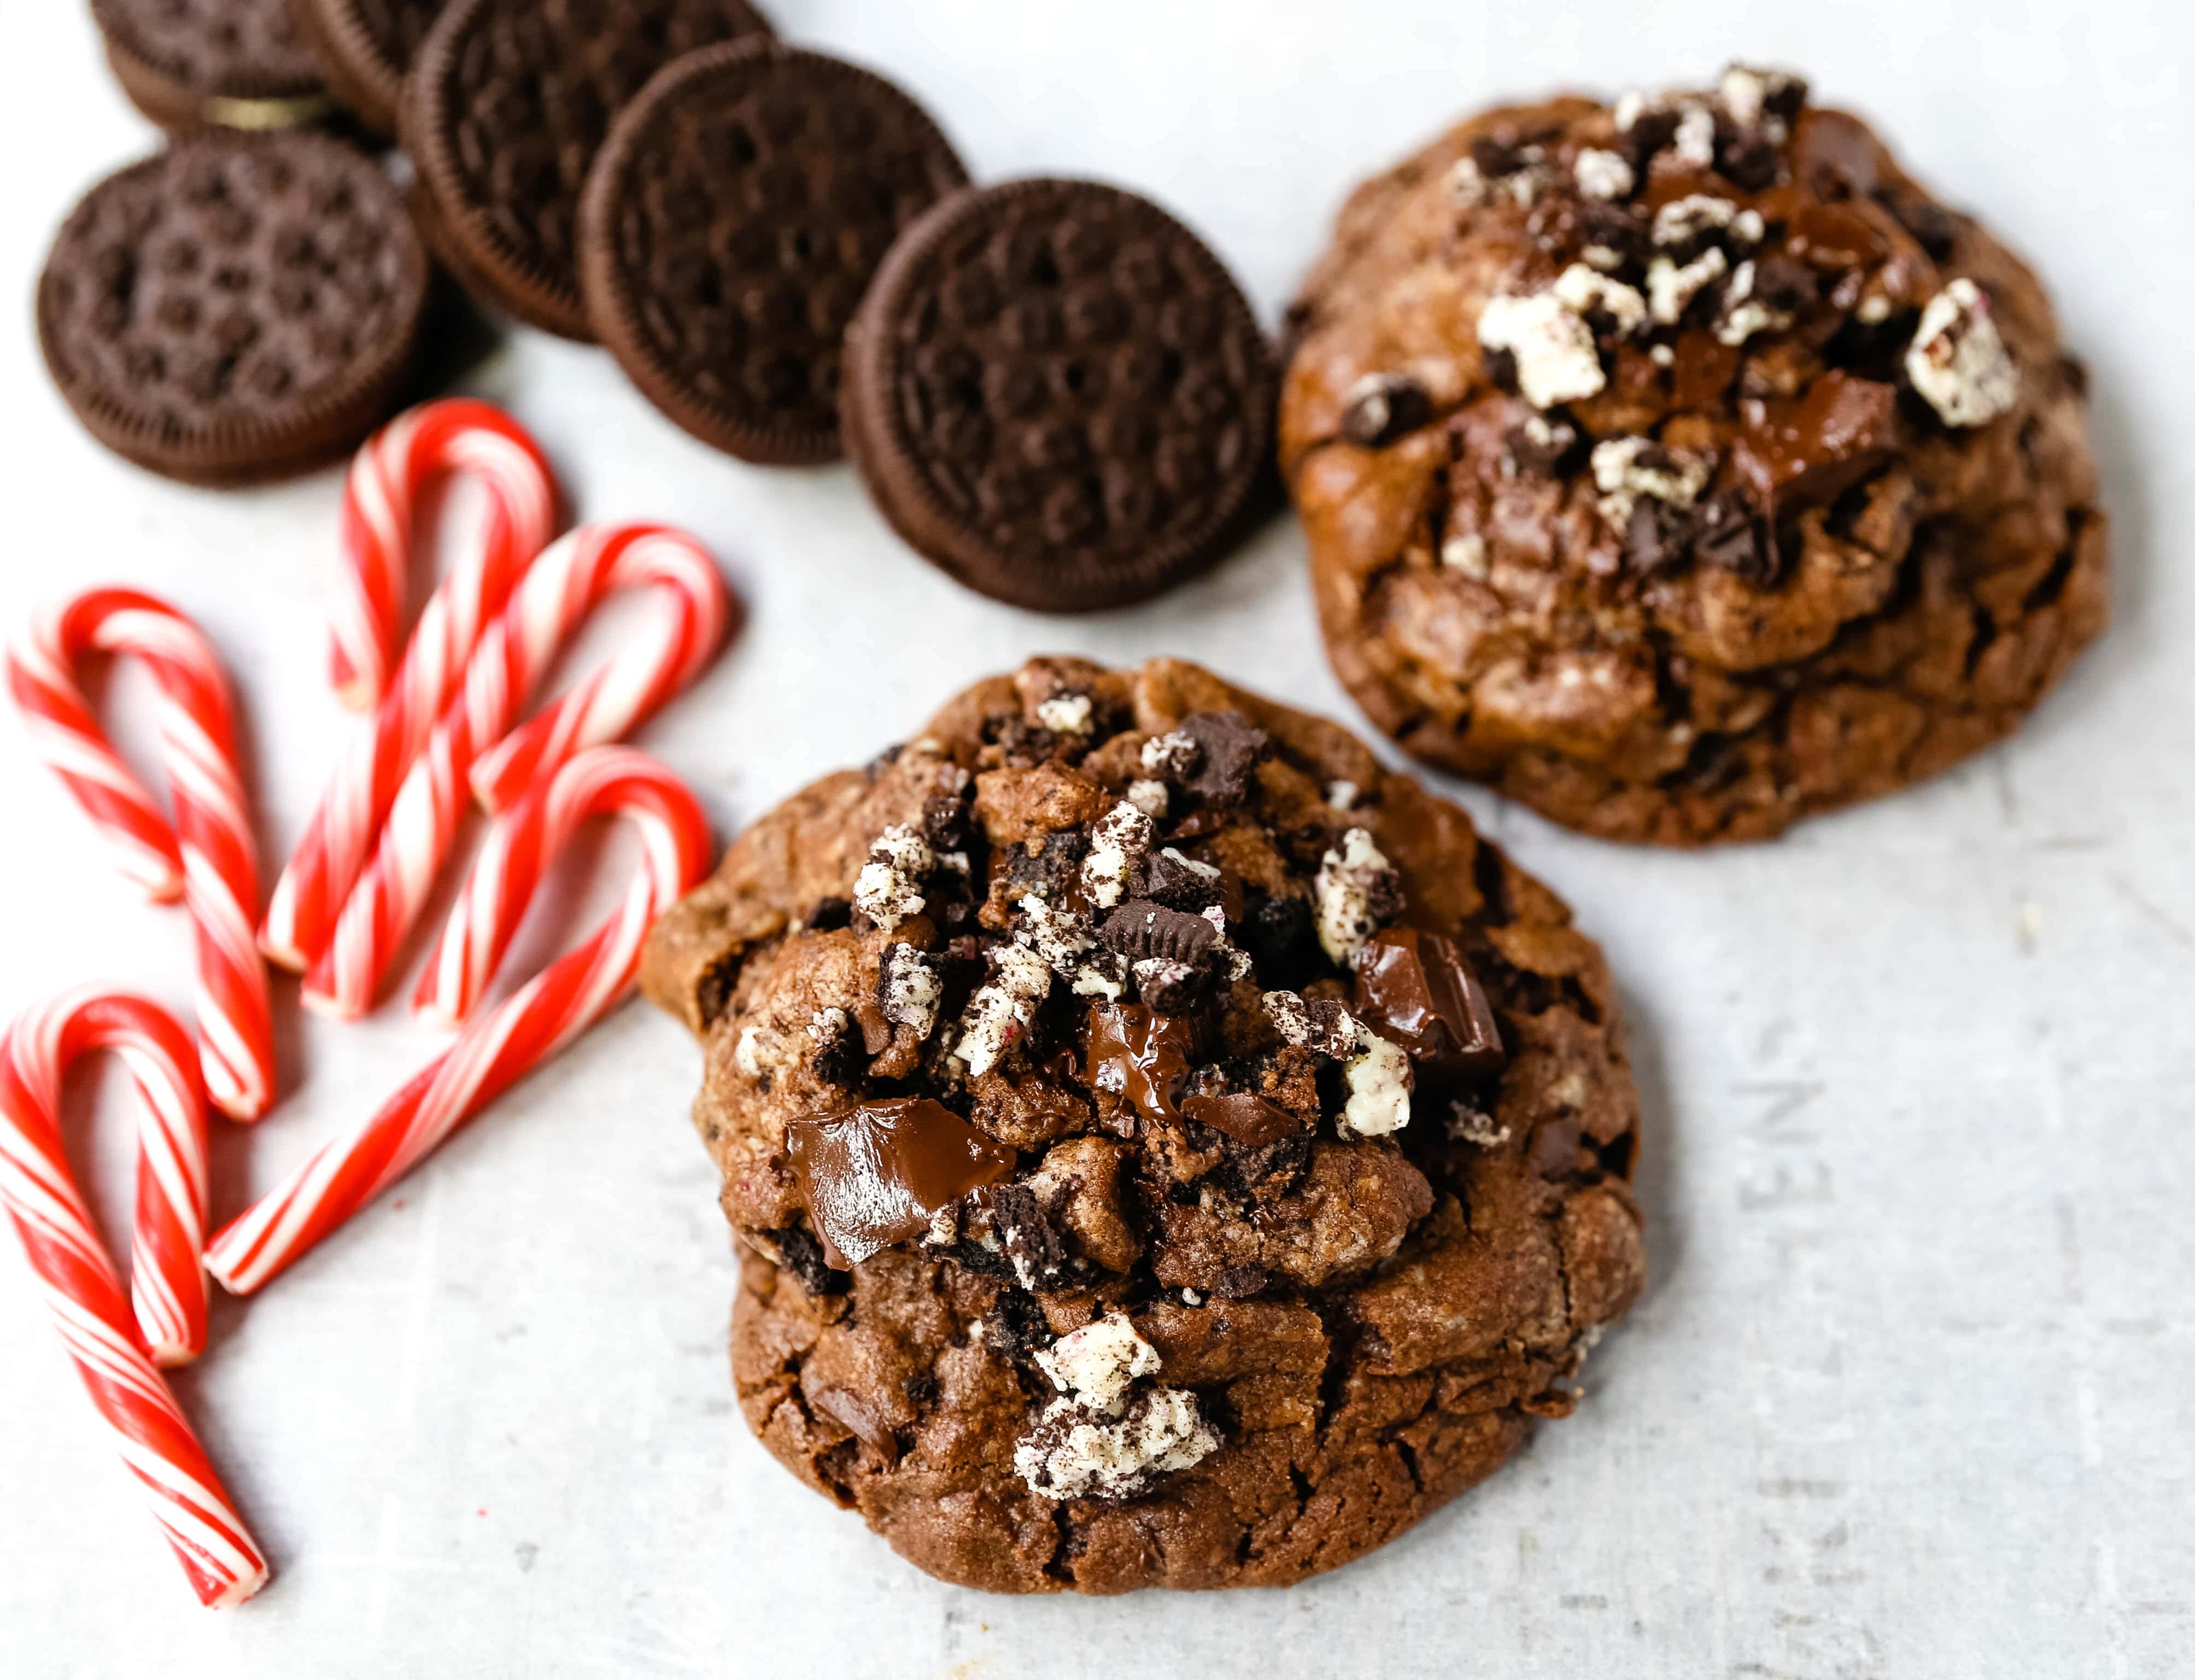 Chocolate Peppermint Candy Cane Oreo Cookies.  The best chocolate peppermint cookies. Double chocolate cookies with Trader Joe's famous candy cane Joe Joe's Oreo cookies. www.modernhoney.com #chocolatecookies #chocolatepeppermint #chocolatemint #christmas #christmascookies #candycanes